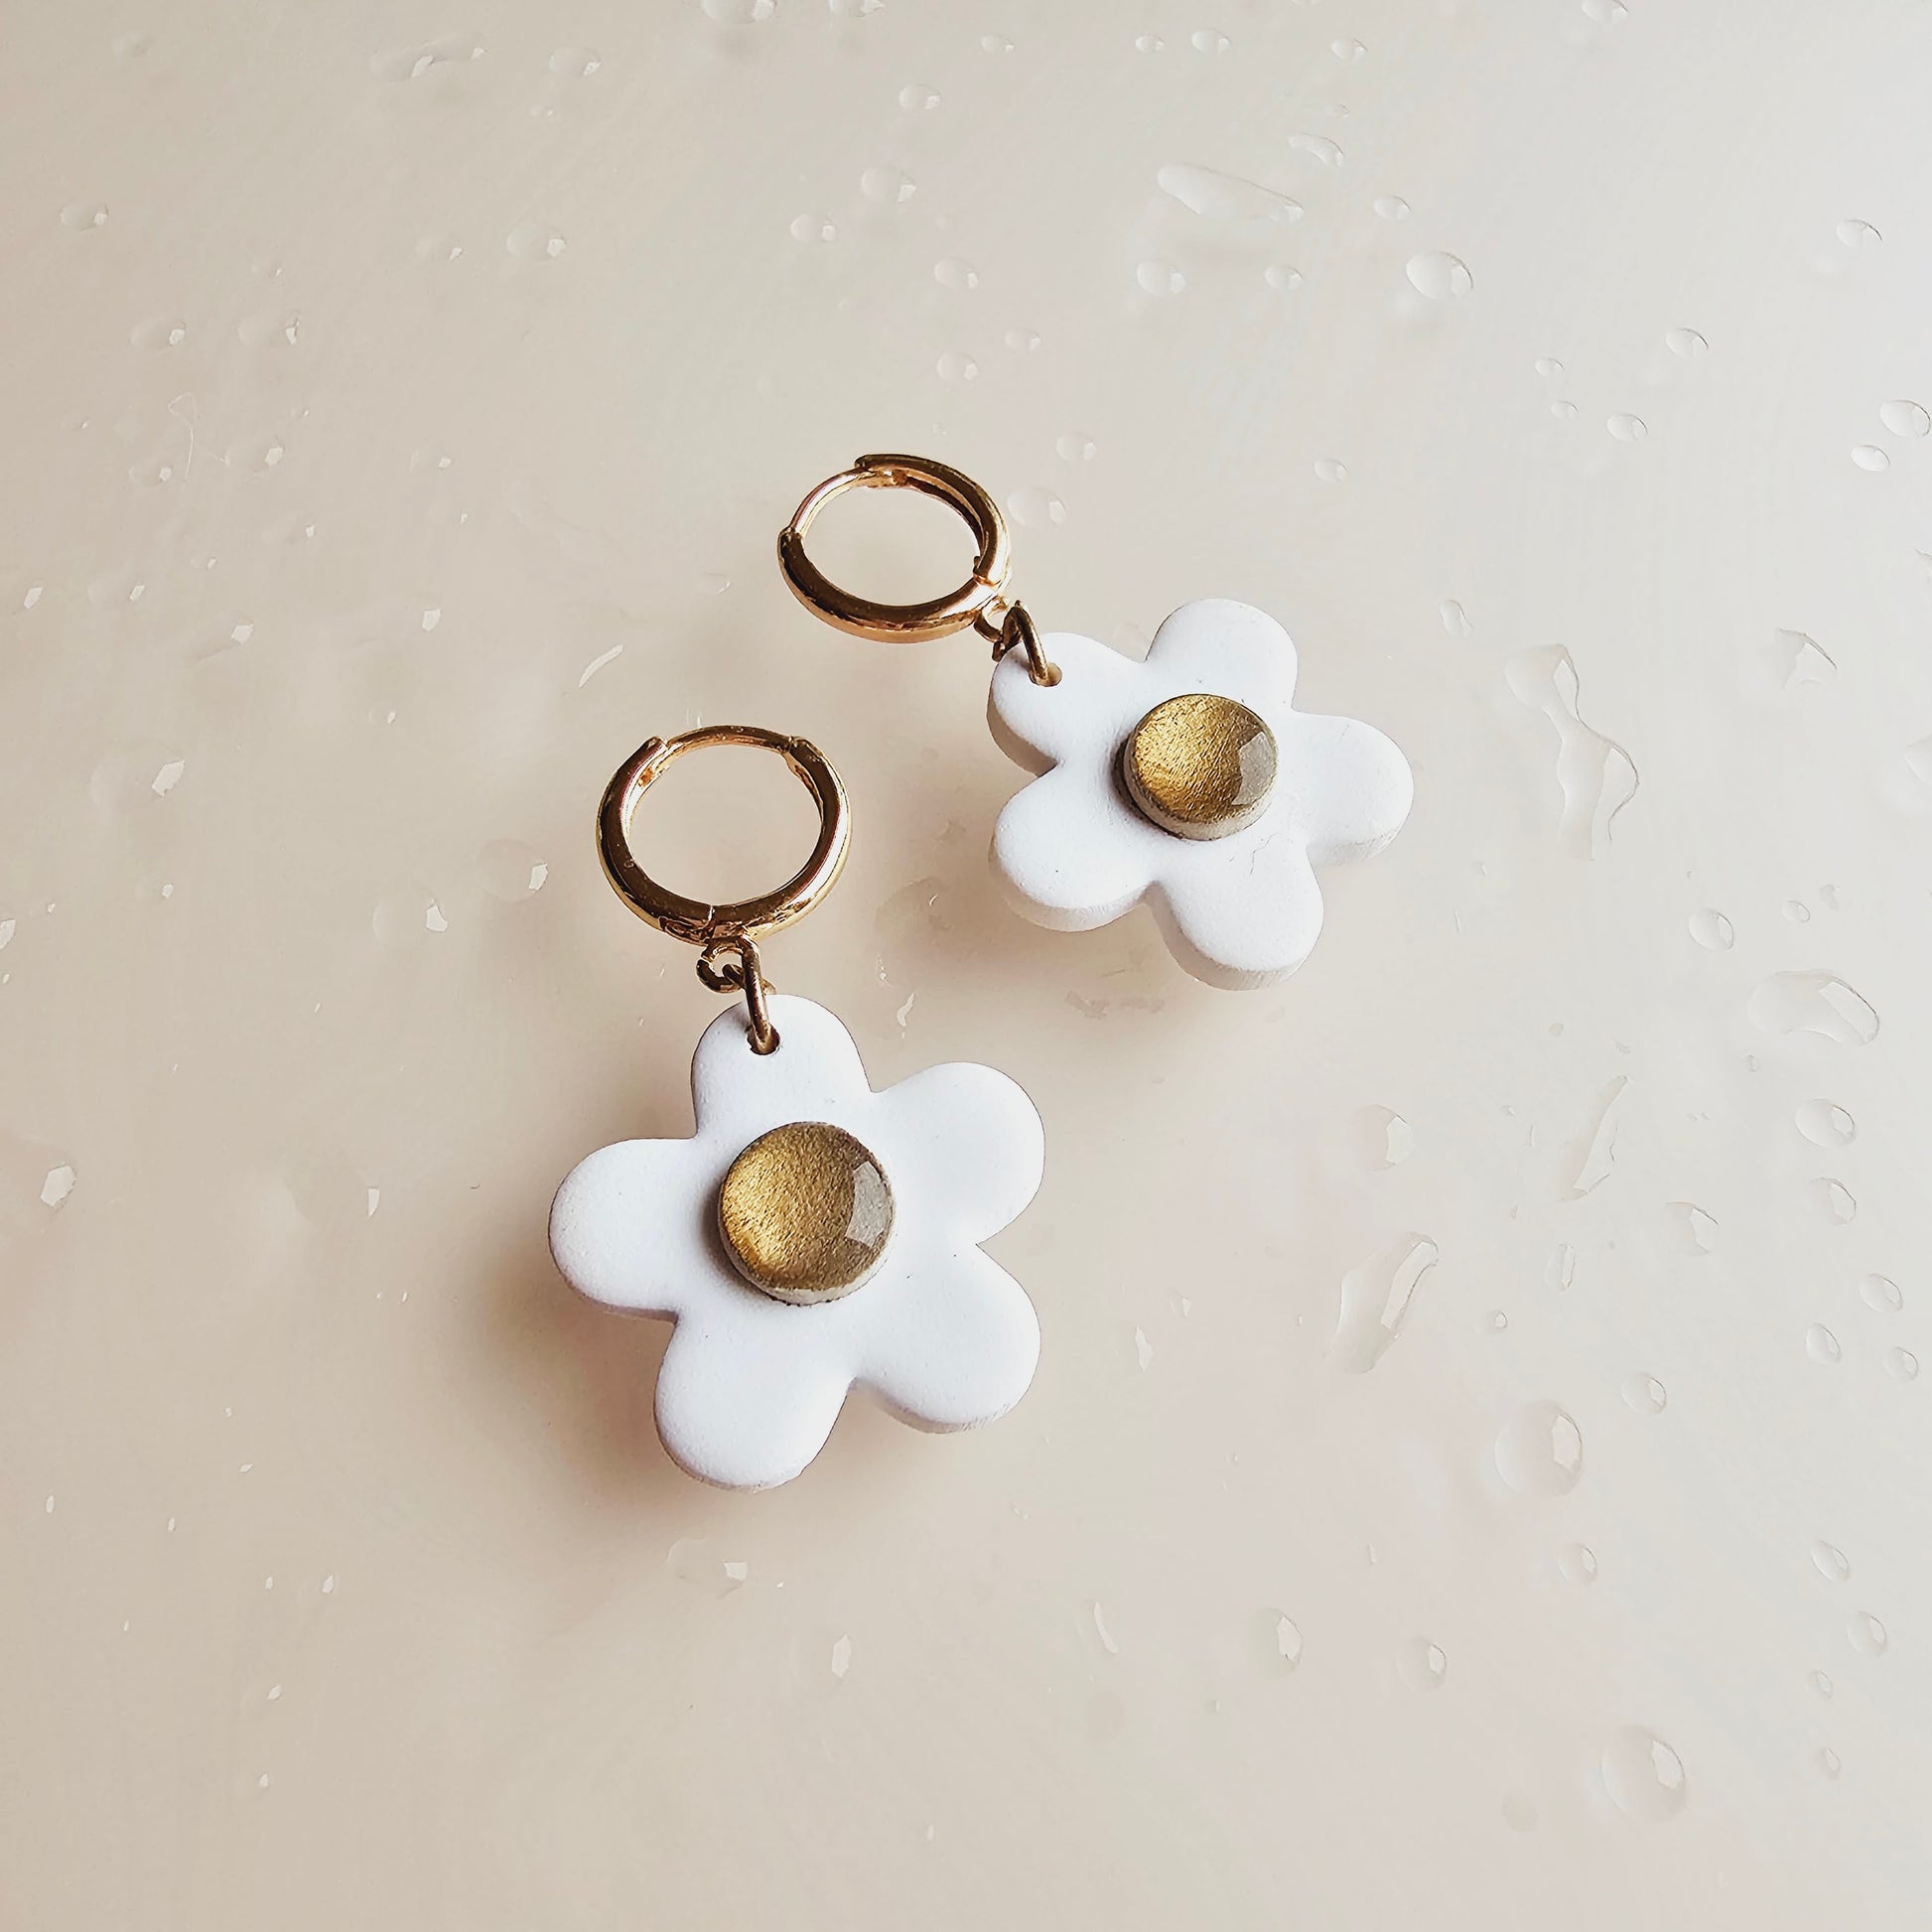 The image shows 2 daisy white earrings. The earrings are a white flower with a gold centre hanging from a gold push back hoop. The daisy flowers are made from polymer clay.  Evelet Designs. 